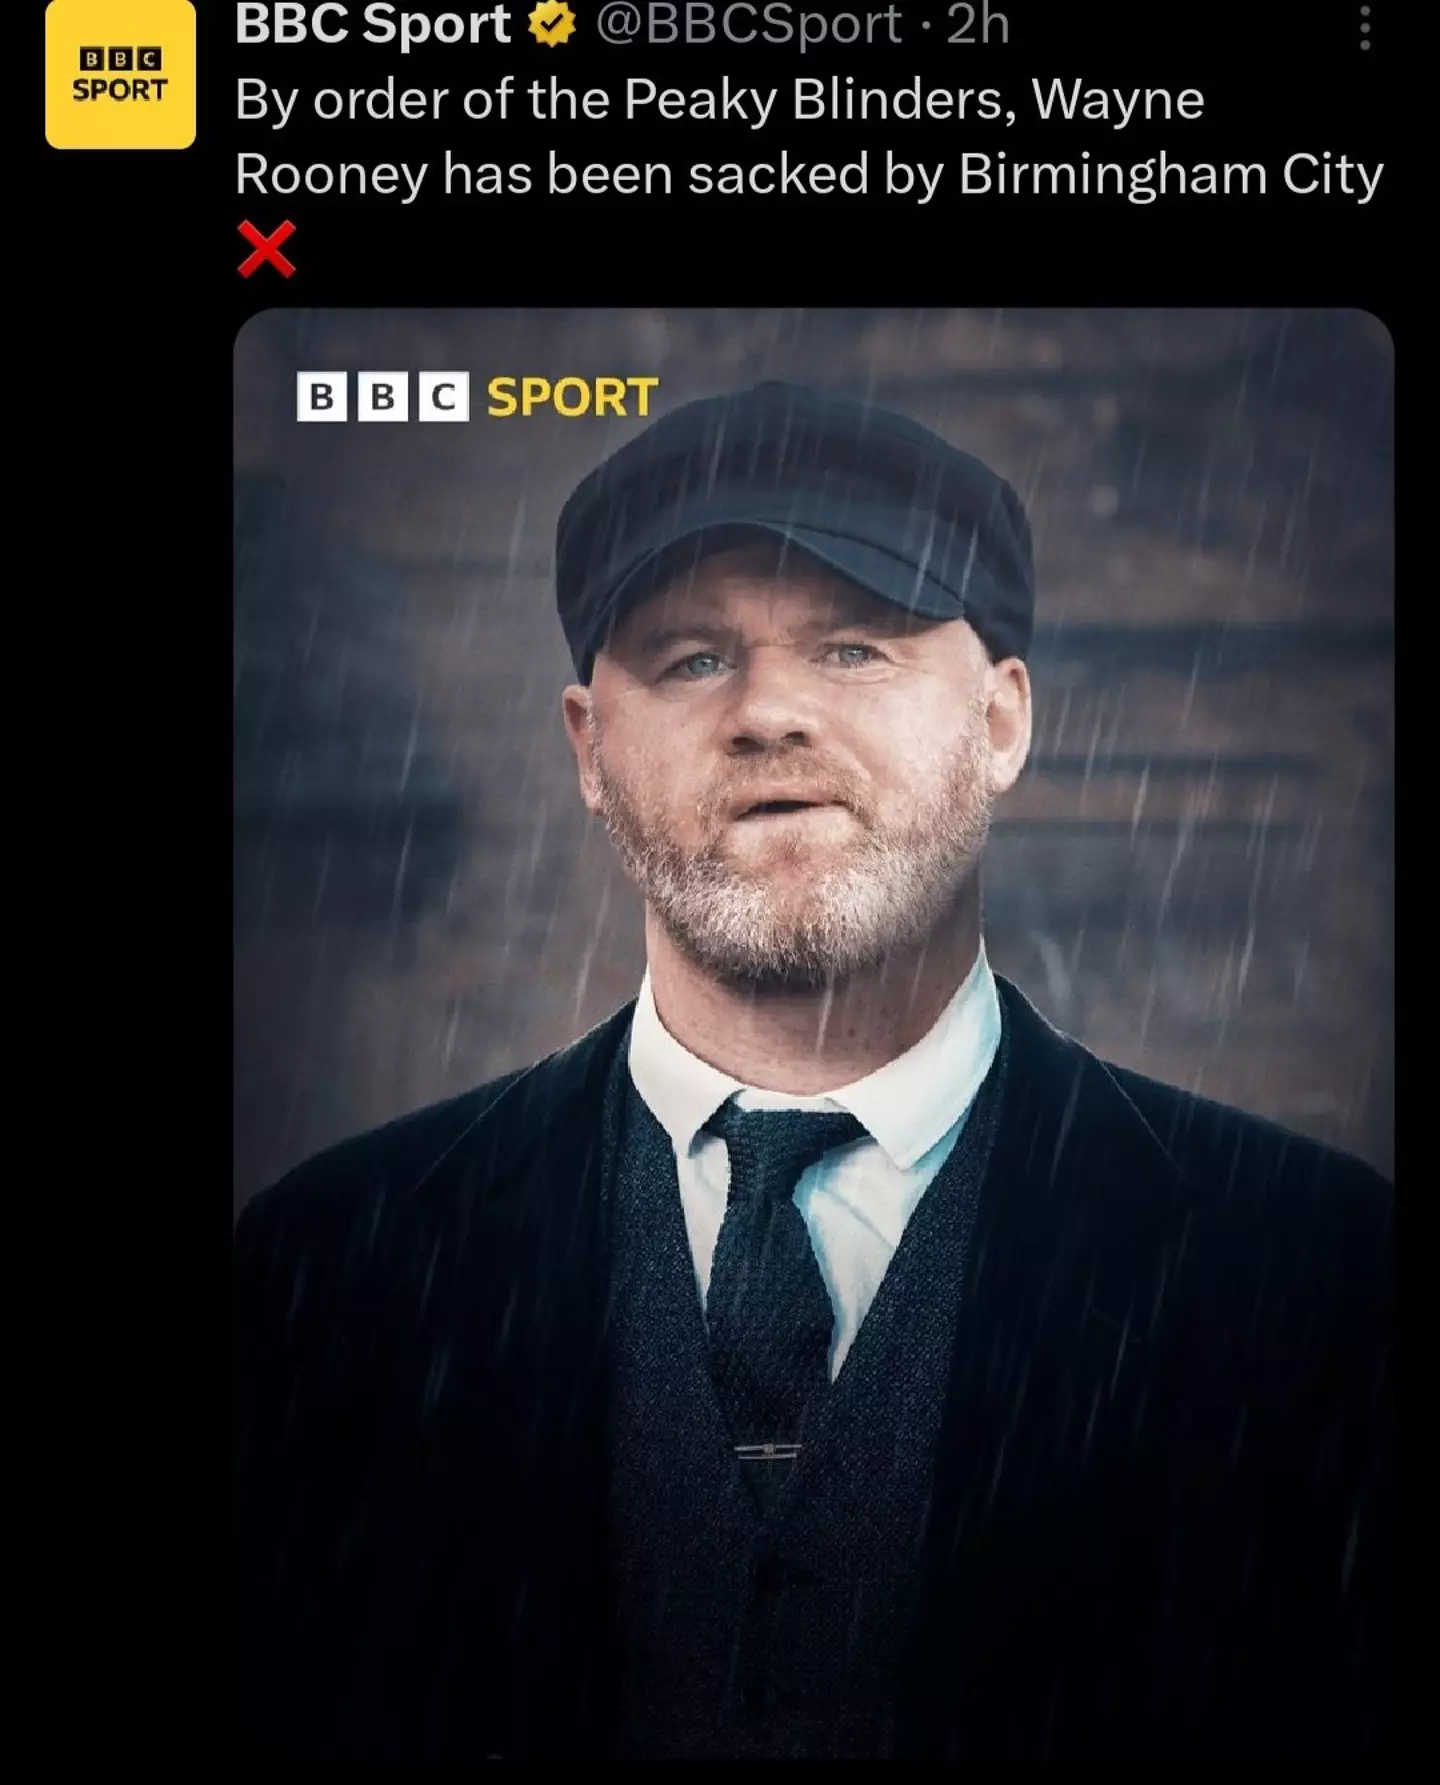 In a now-deleted post, BBC Sport seemed to poke fun at Wayne Rooney following the announcement of him being sacked by Birmingham City.